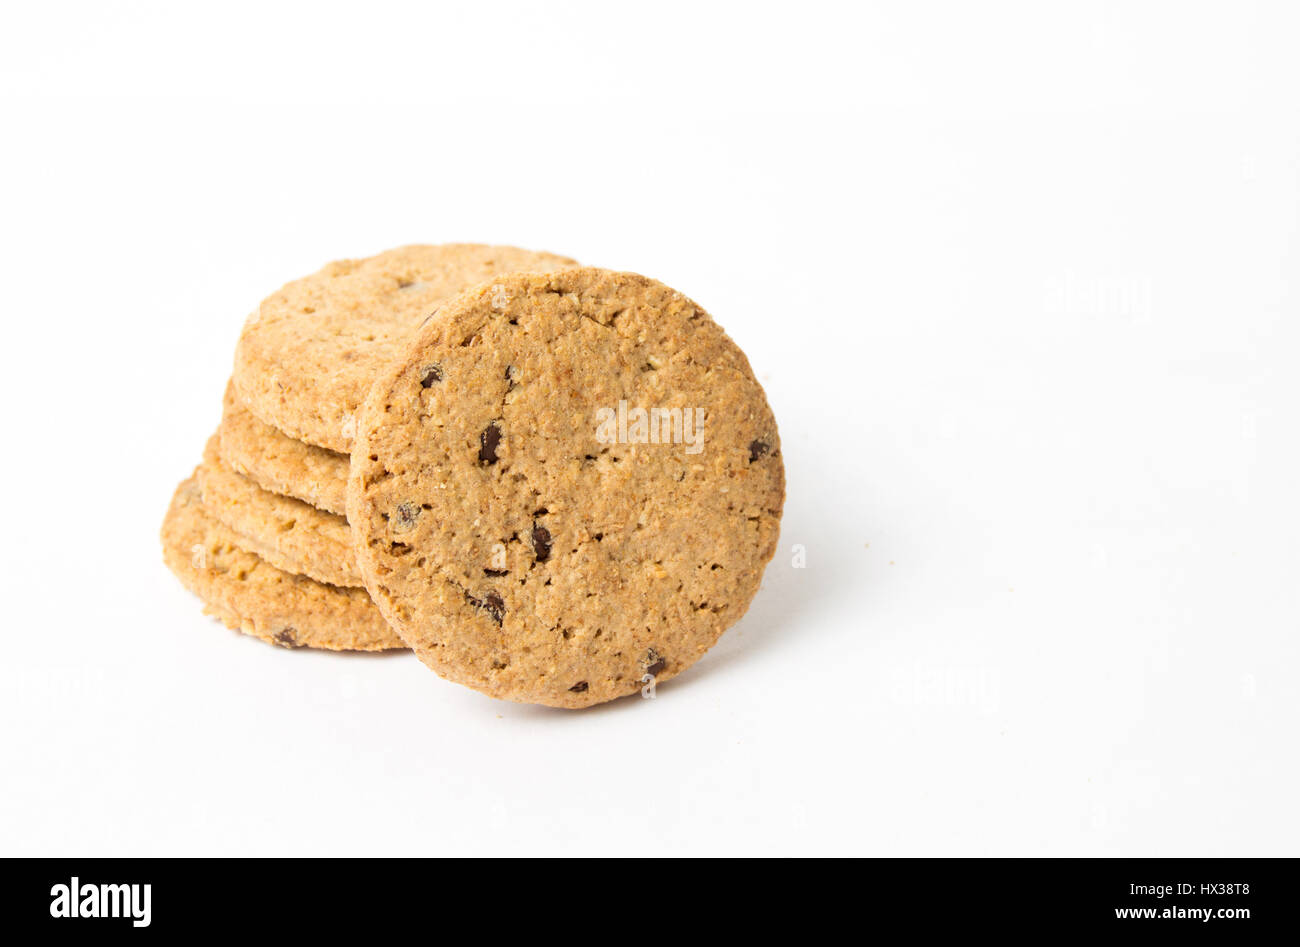 Integral cookies with chocolate pieces on white background Stock Photo